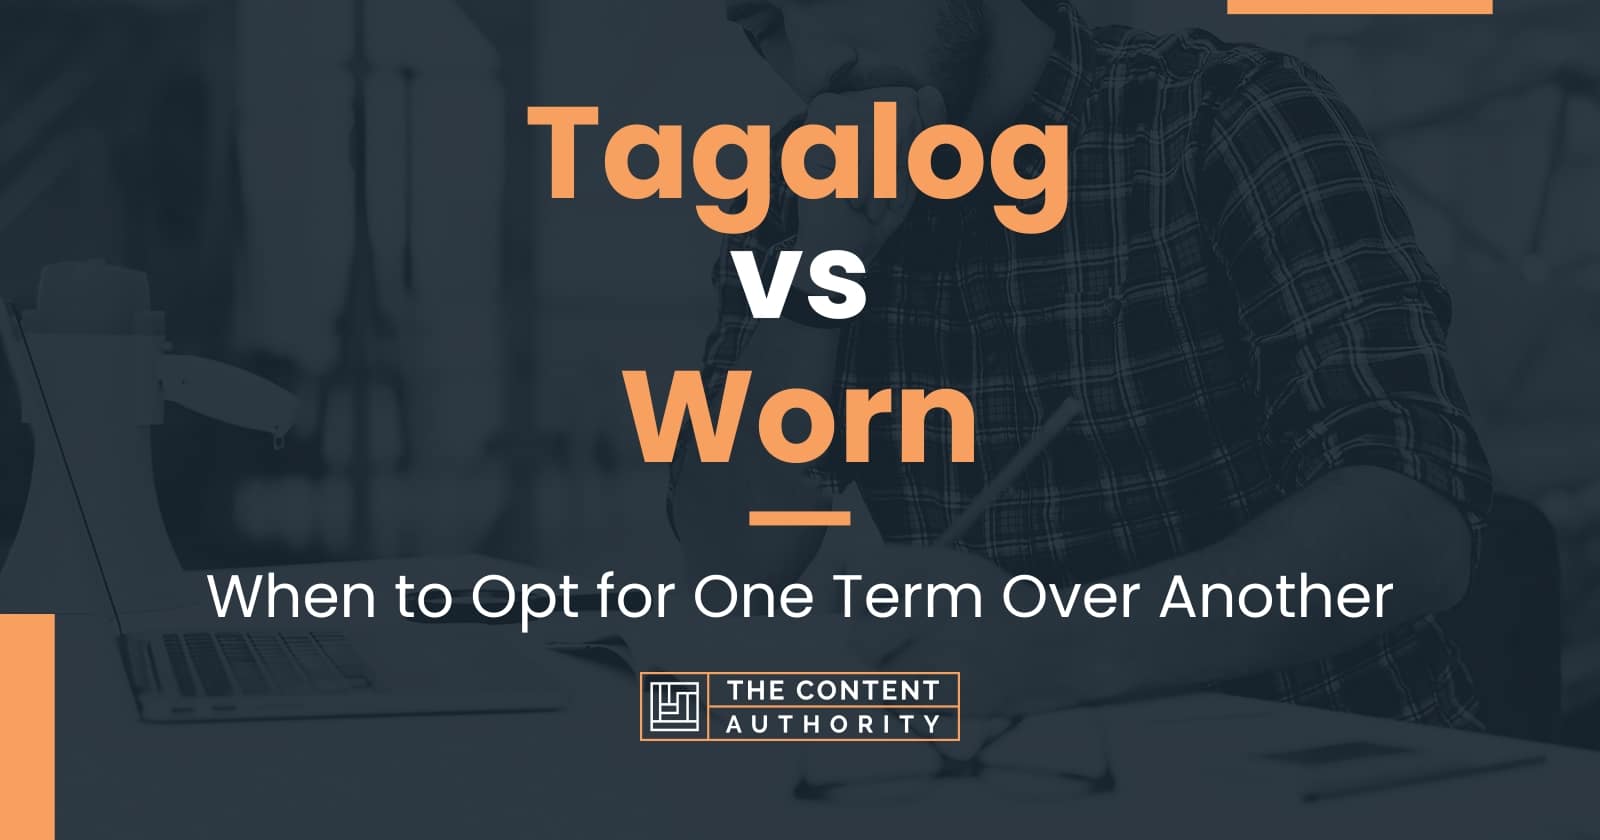 Tagalog vs Worn: When to Opt for One Term Over Another